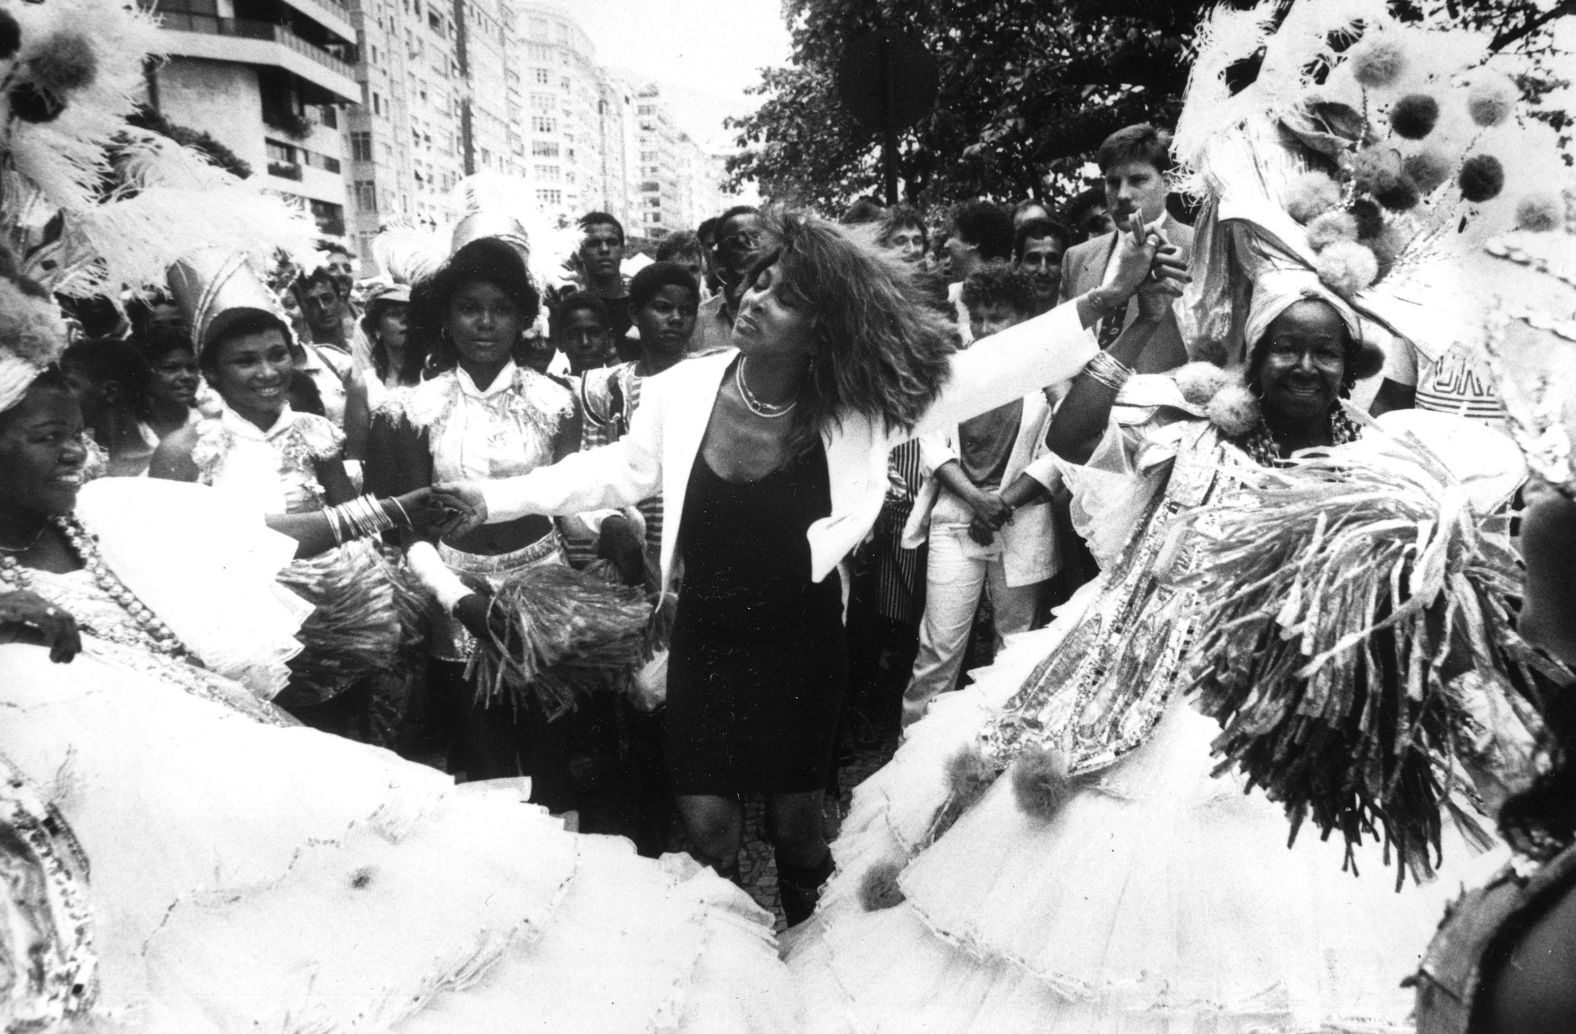 Turner dances on the streets of Rio de Janeiro with traditional Carnival performers in 1987. She was in Brazil as part of her world tour.